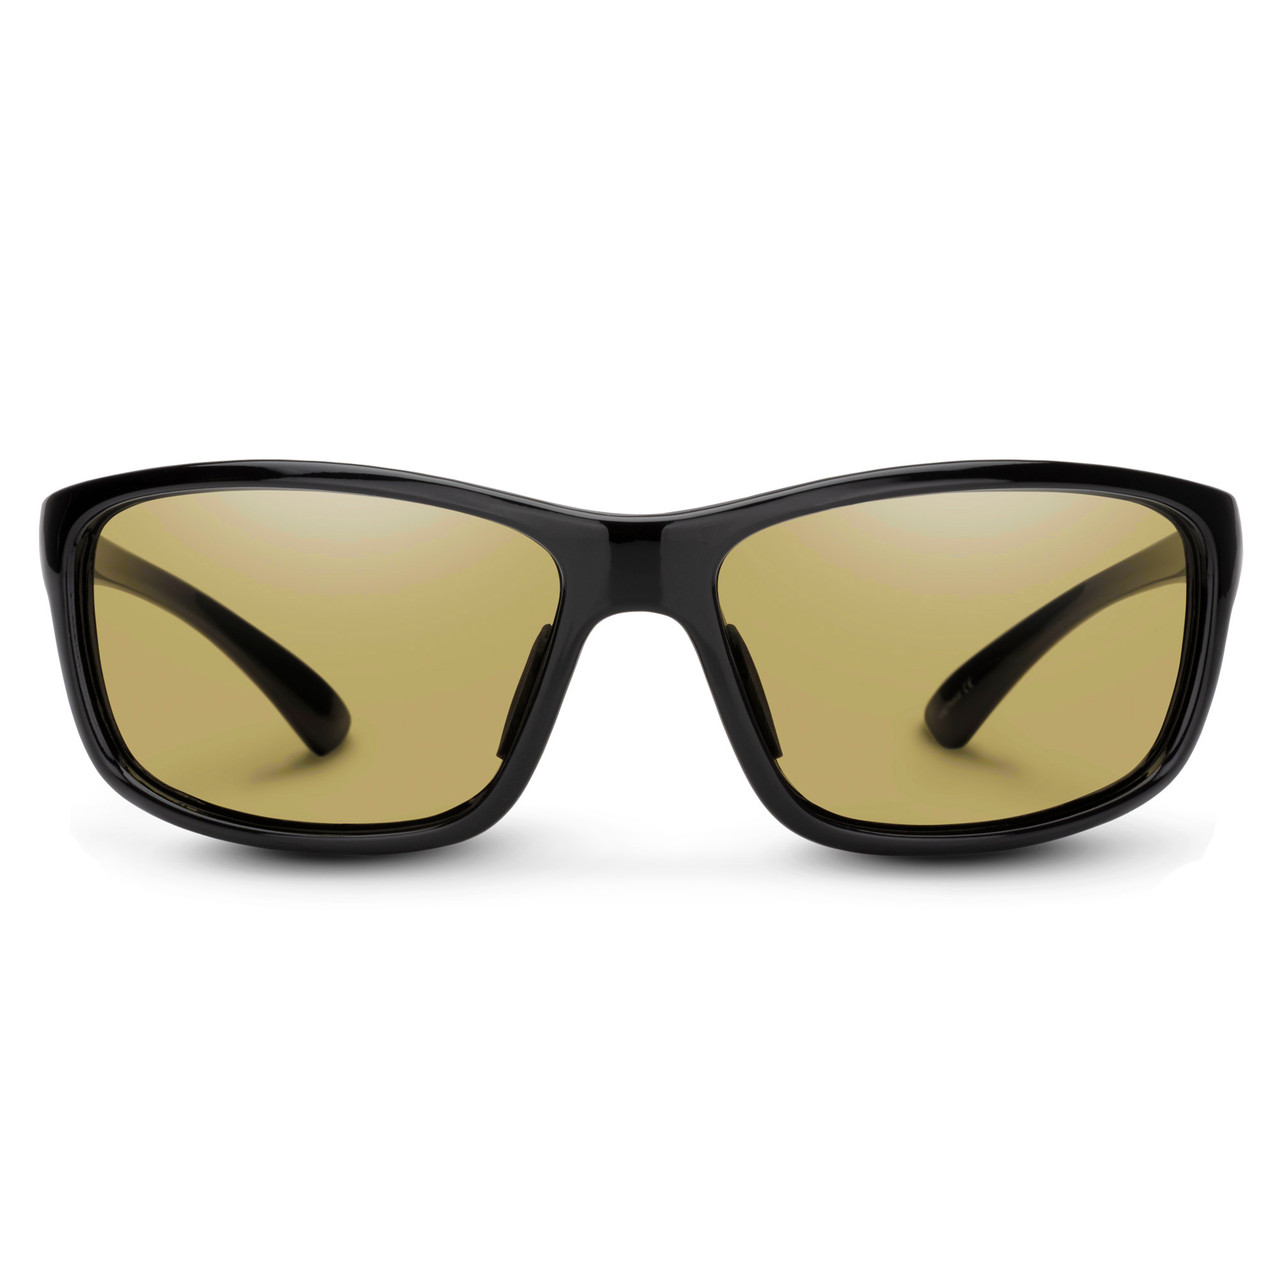 Front View of Suncloud Sentry Polarized Sunglasses by Smith Optics Classic Wrap in Black with Polar Yellow